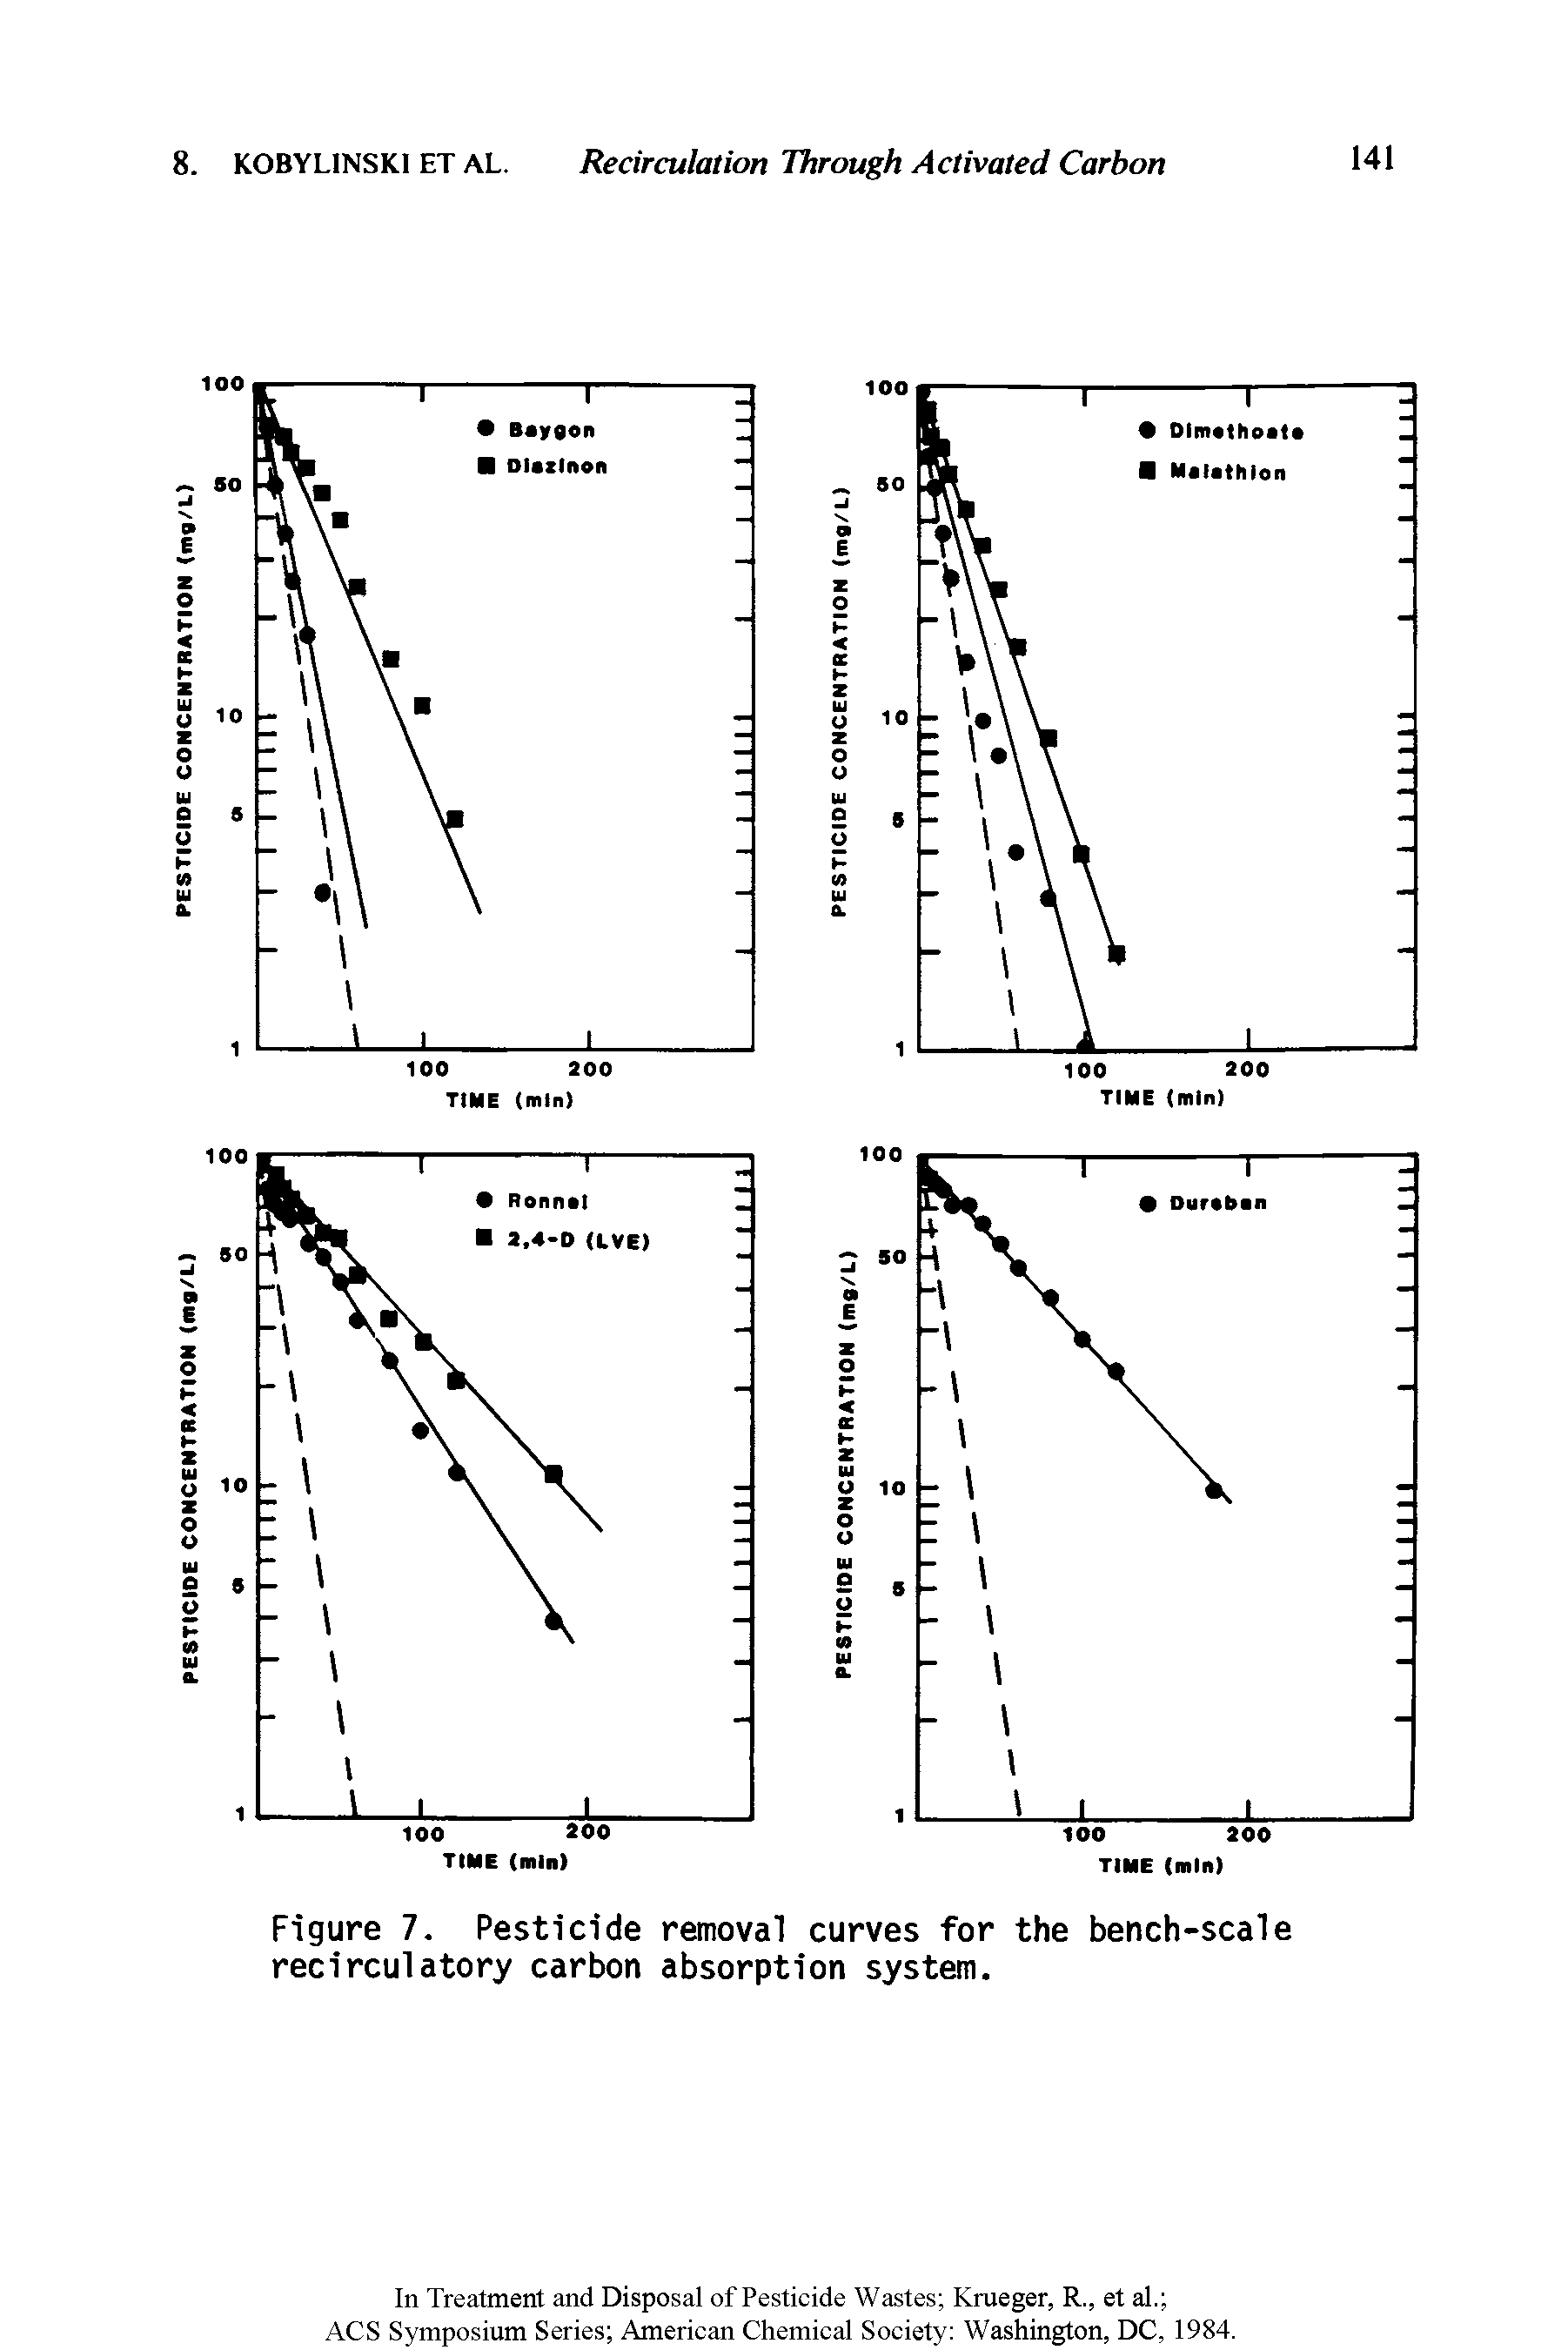 Figure 7. Pesticide removal curves for the bench-scale recirculatory carbon absorption system.